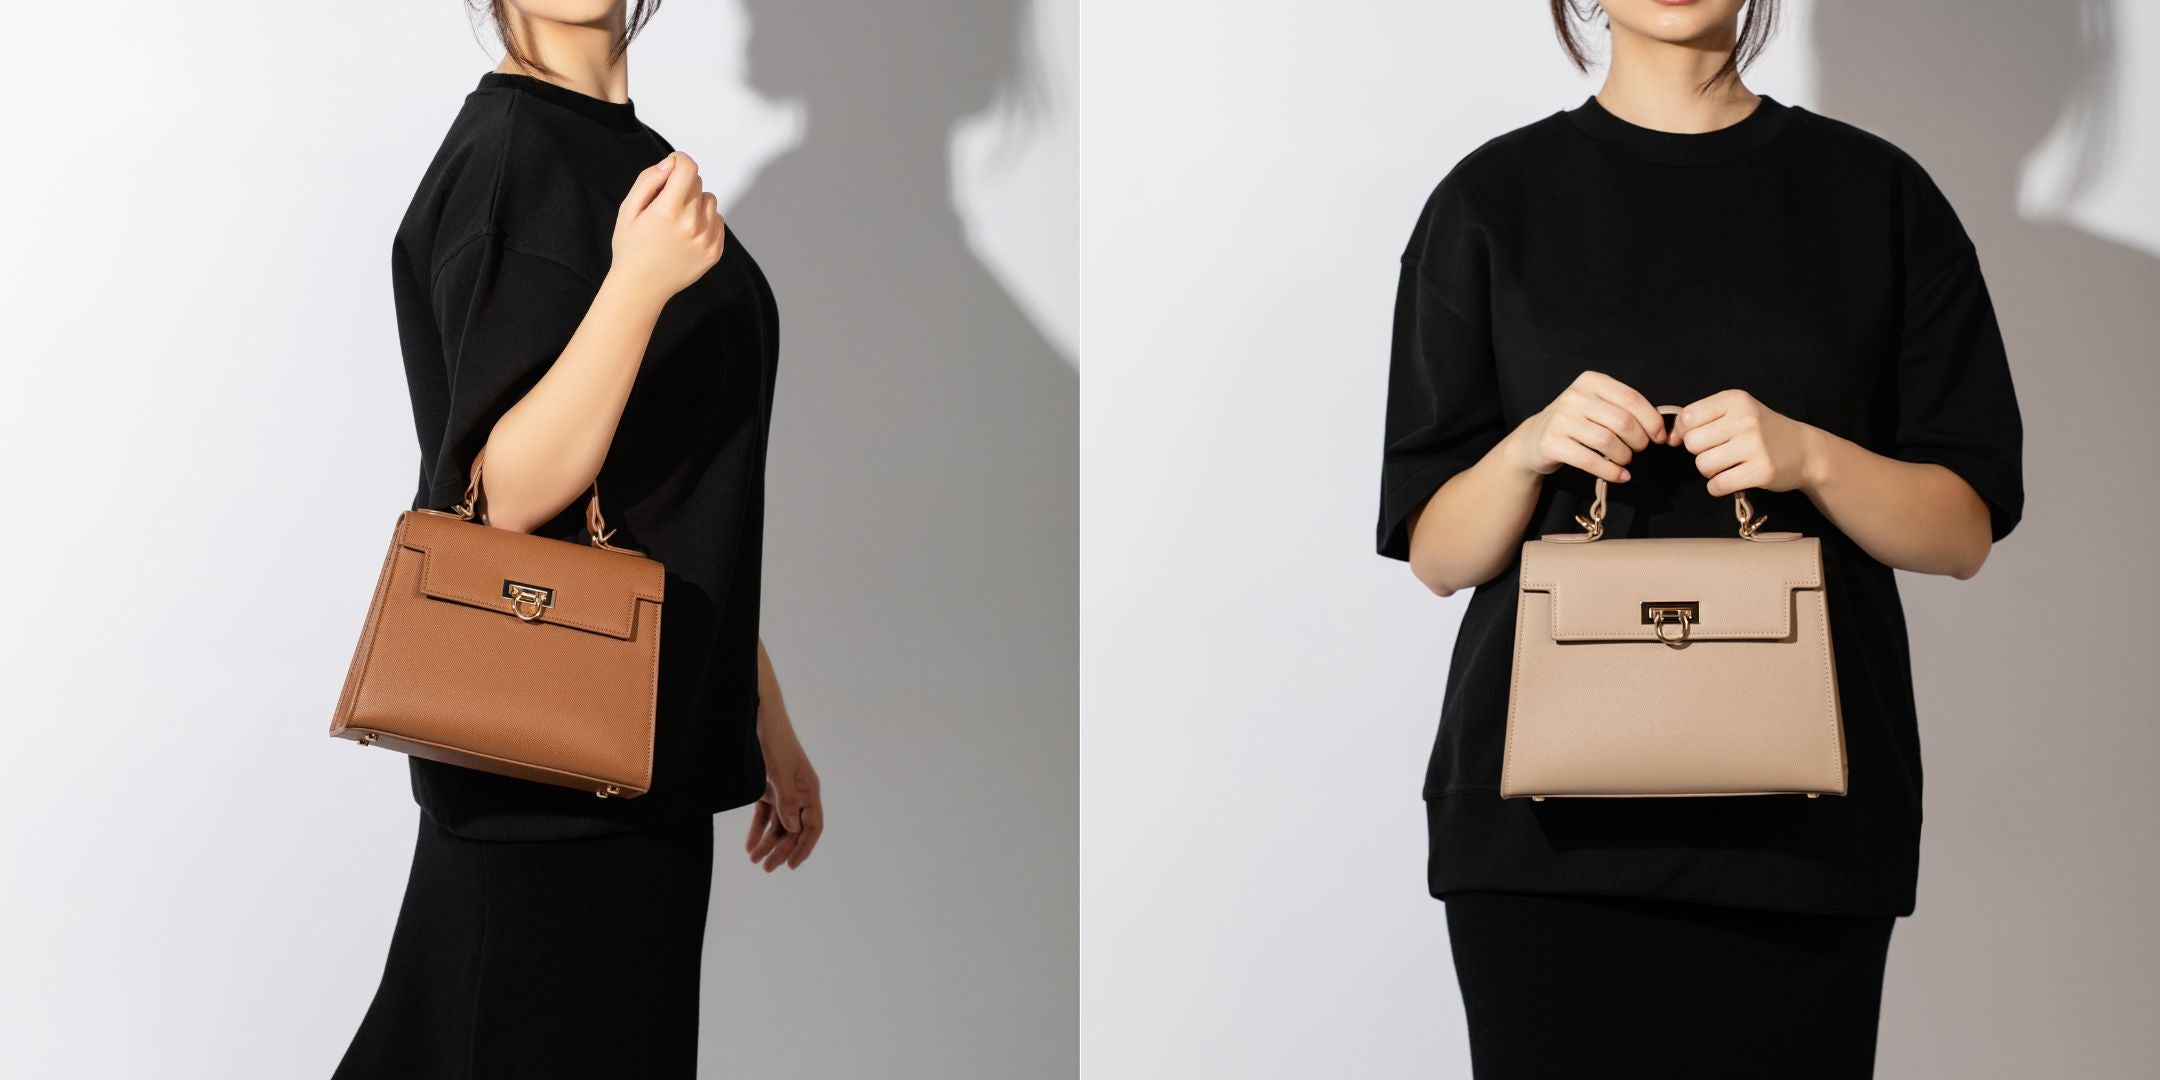 Fashionable women in monochrome outfits, clutching designer handbags by levantine